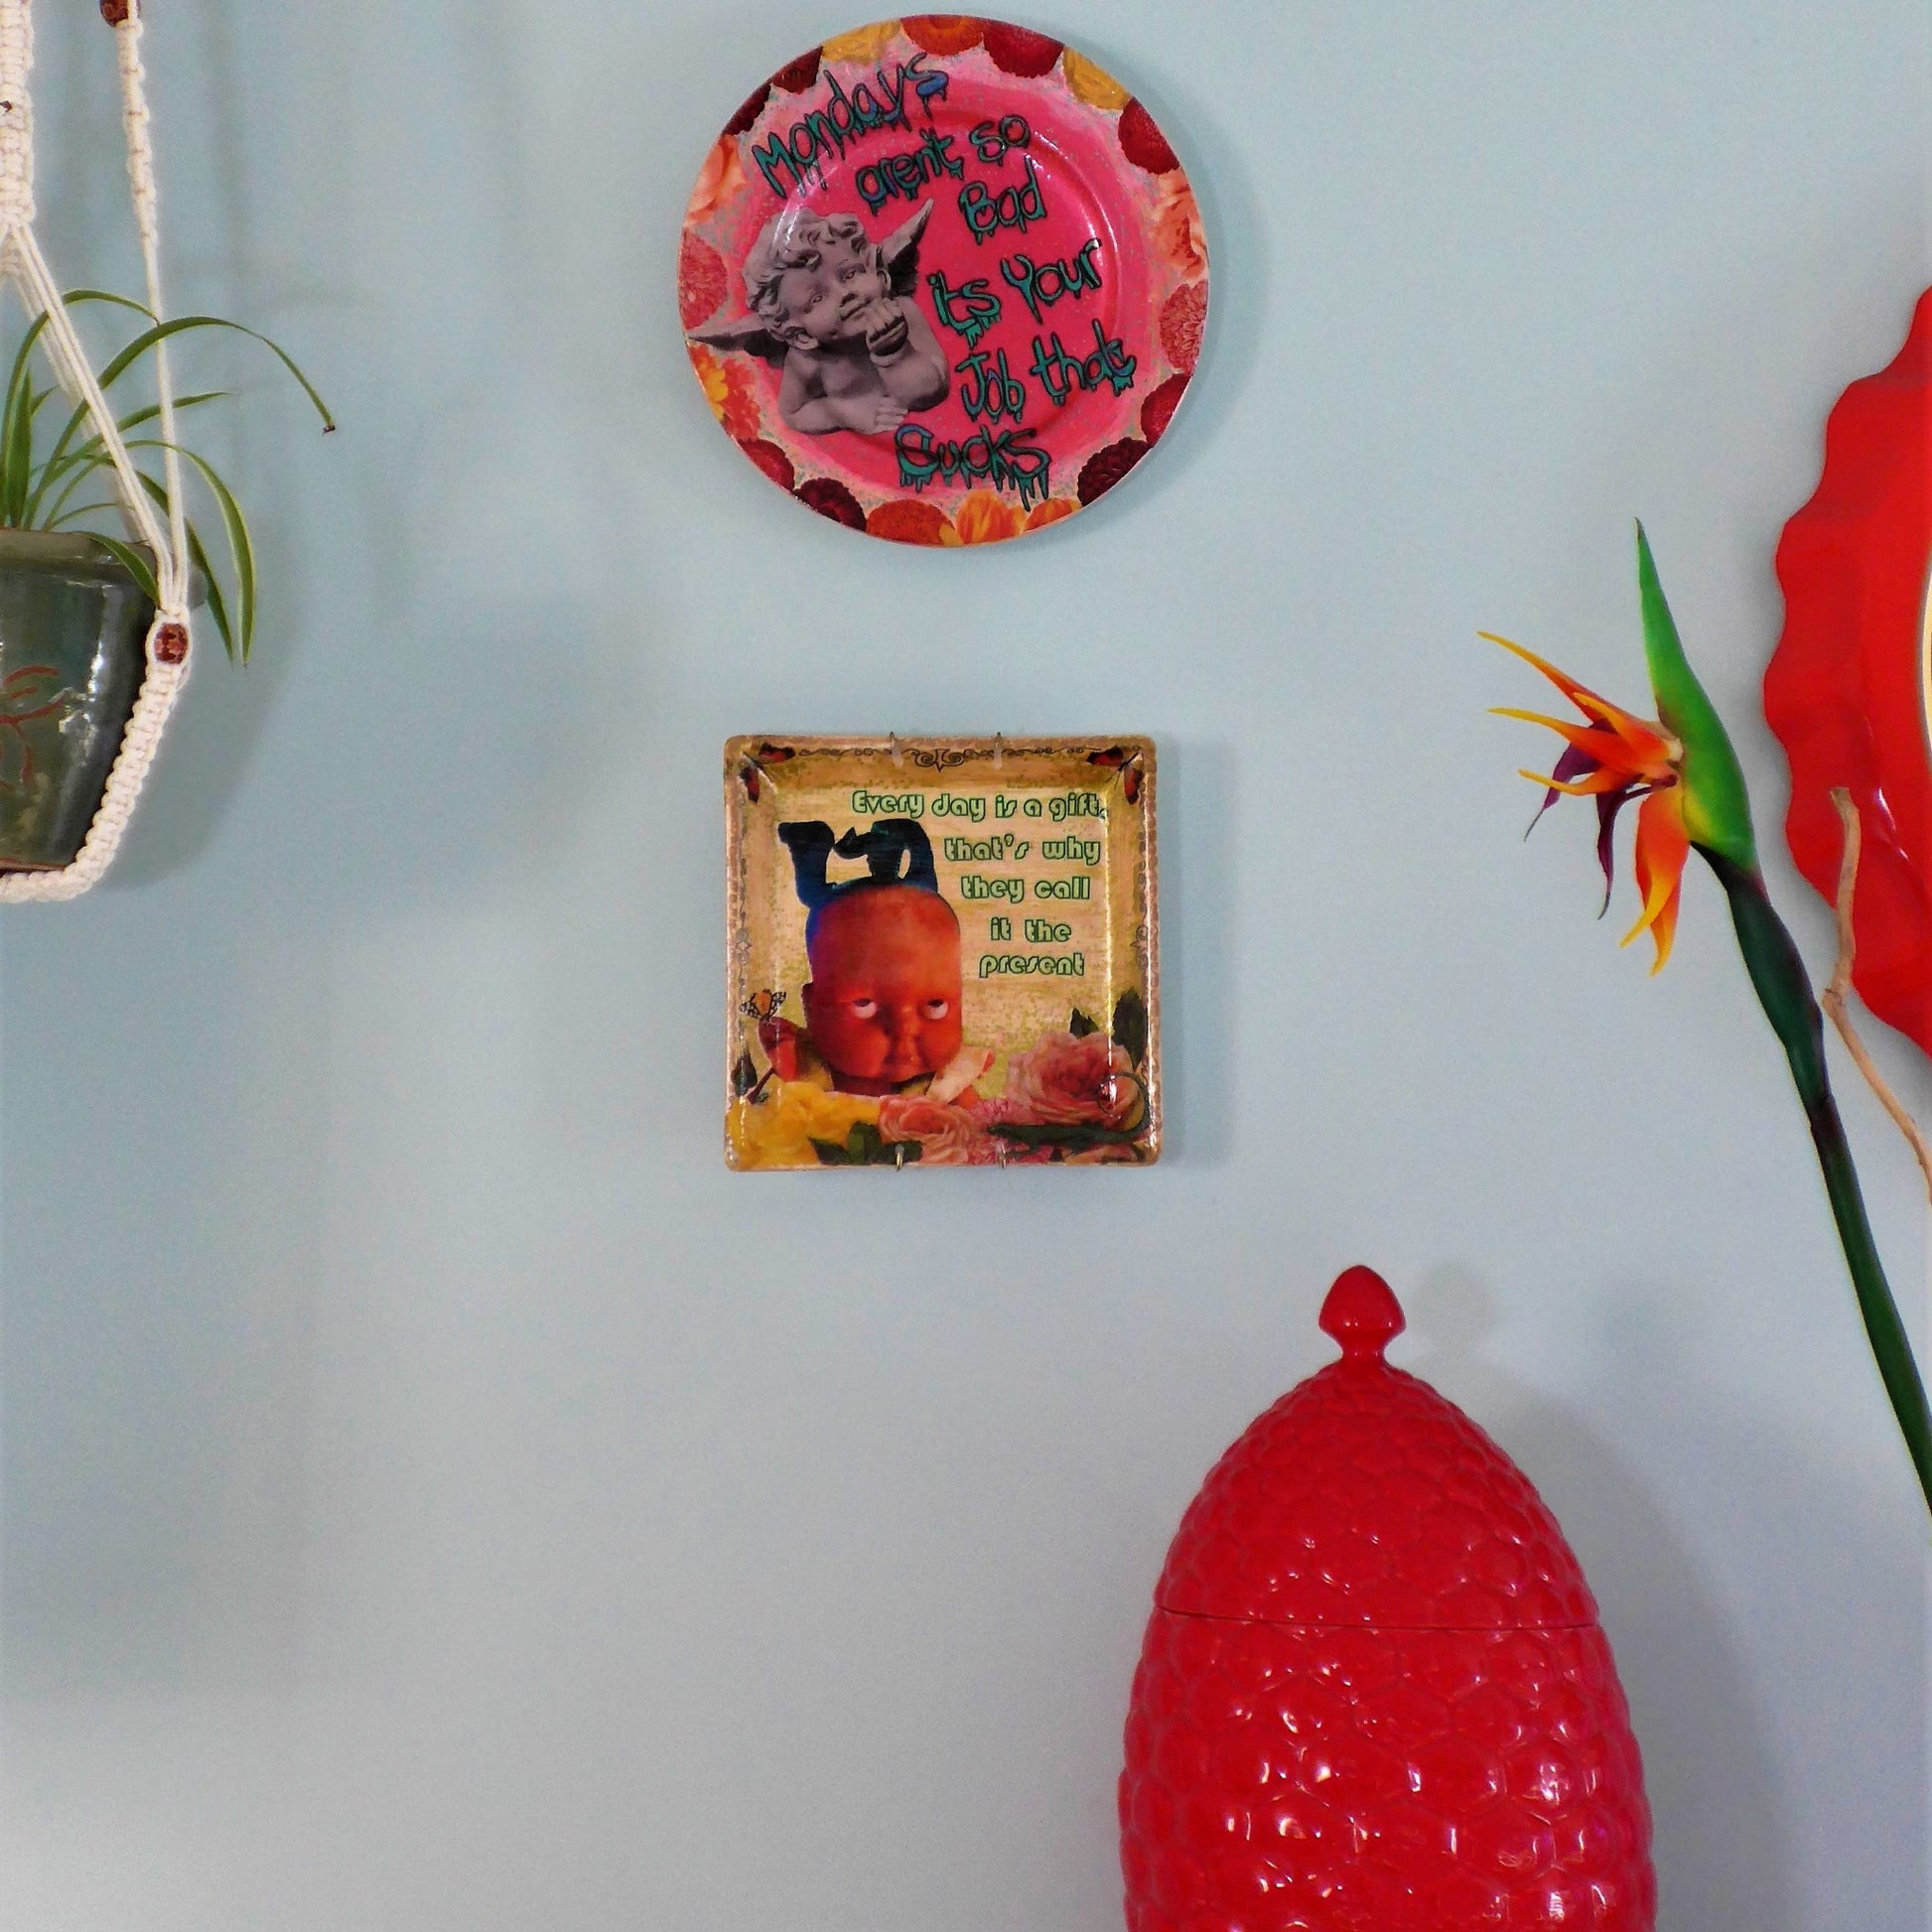 House of Frisson "Every Day Is A Gift, That's Why They Call It The Present" Beige Wall Plate. Collage artwork on upcycled plate, featuring a doll rolling  eyes, flowers, and a lizard. Showing plate hanging on wall with other plates.